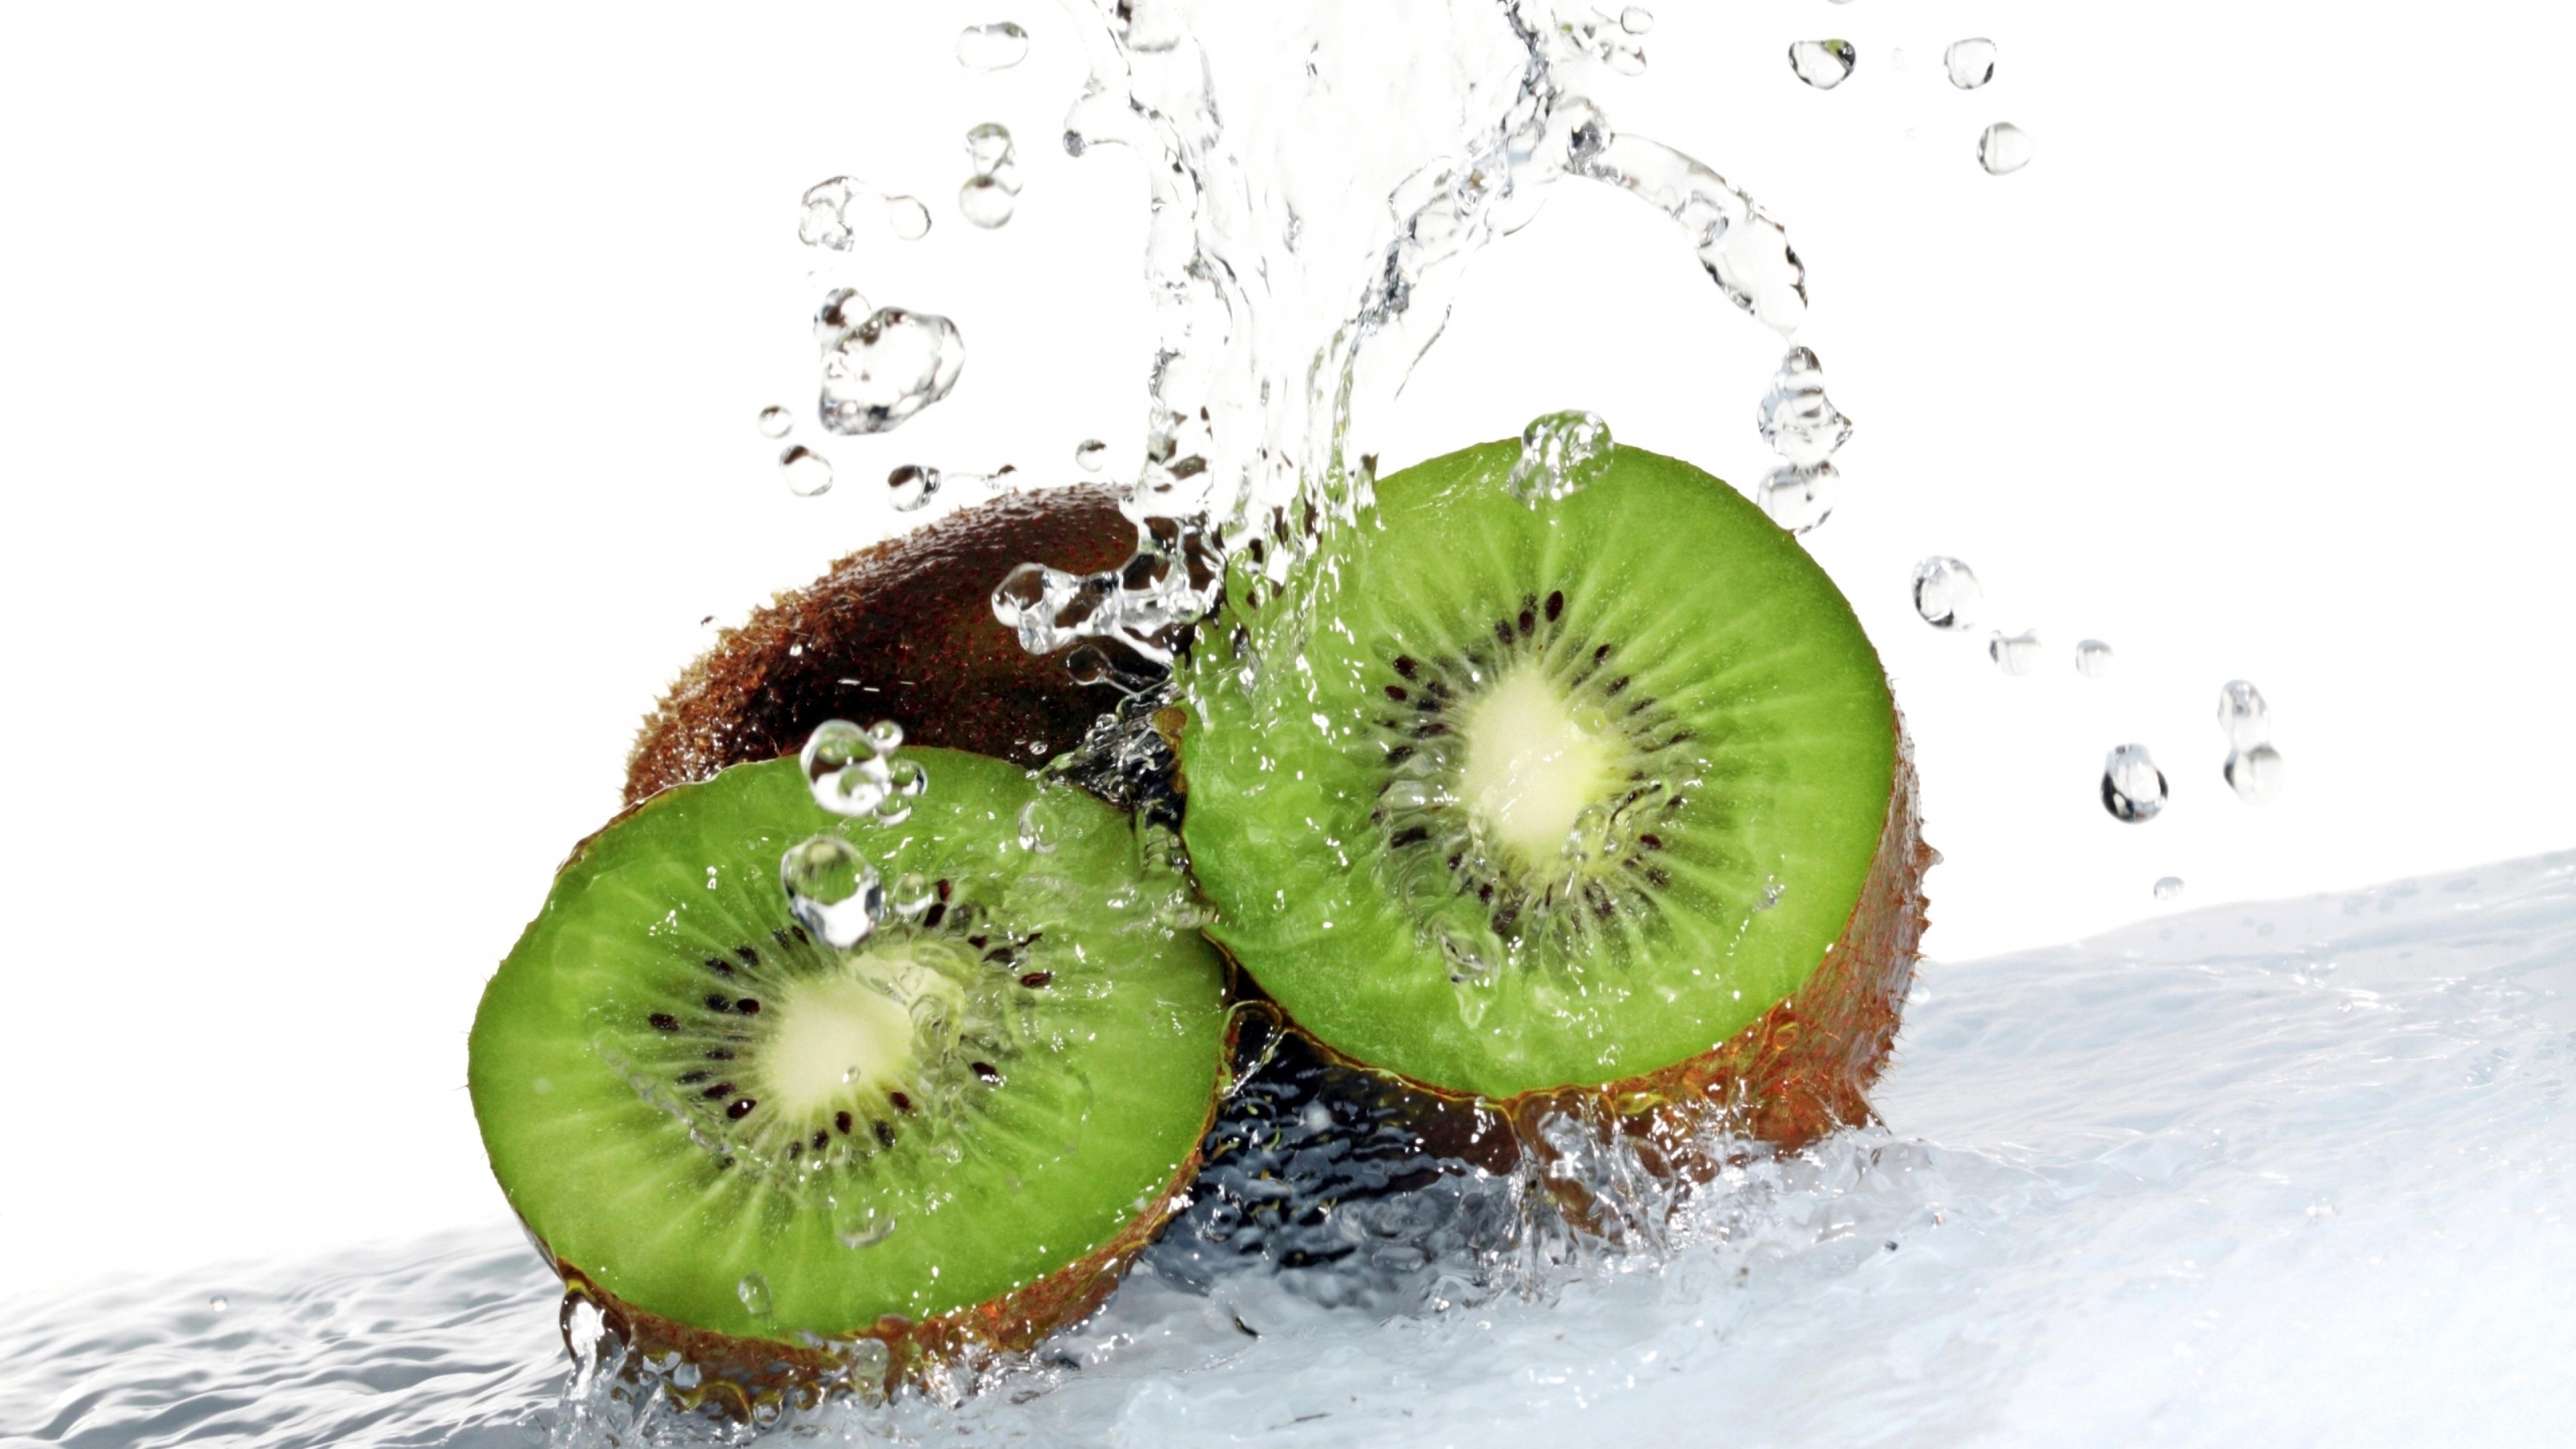 Kiwi fruit water, Hydrating image, Quenches thirst, Summertime delight, 3840x2160 4K Desktop